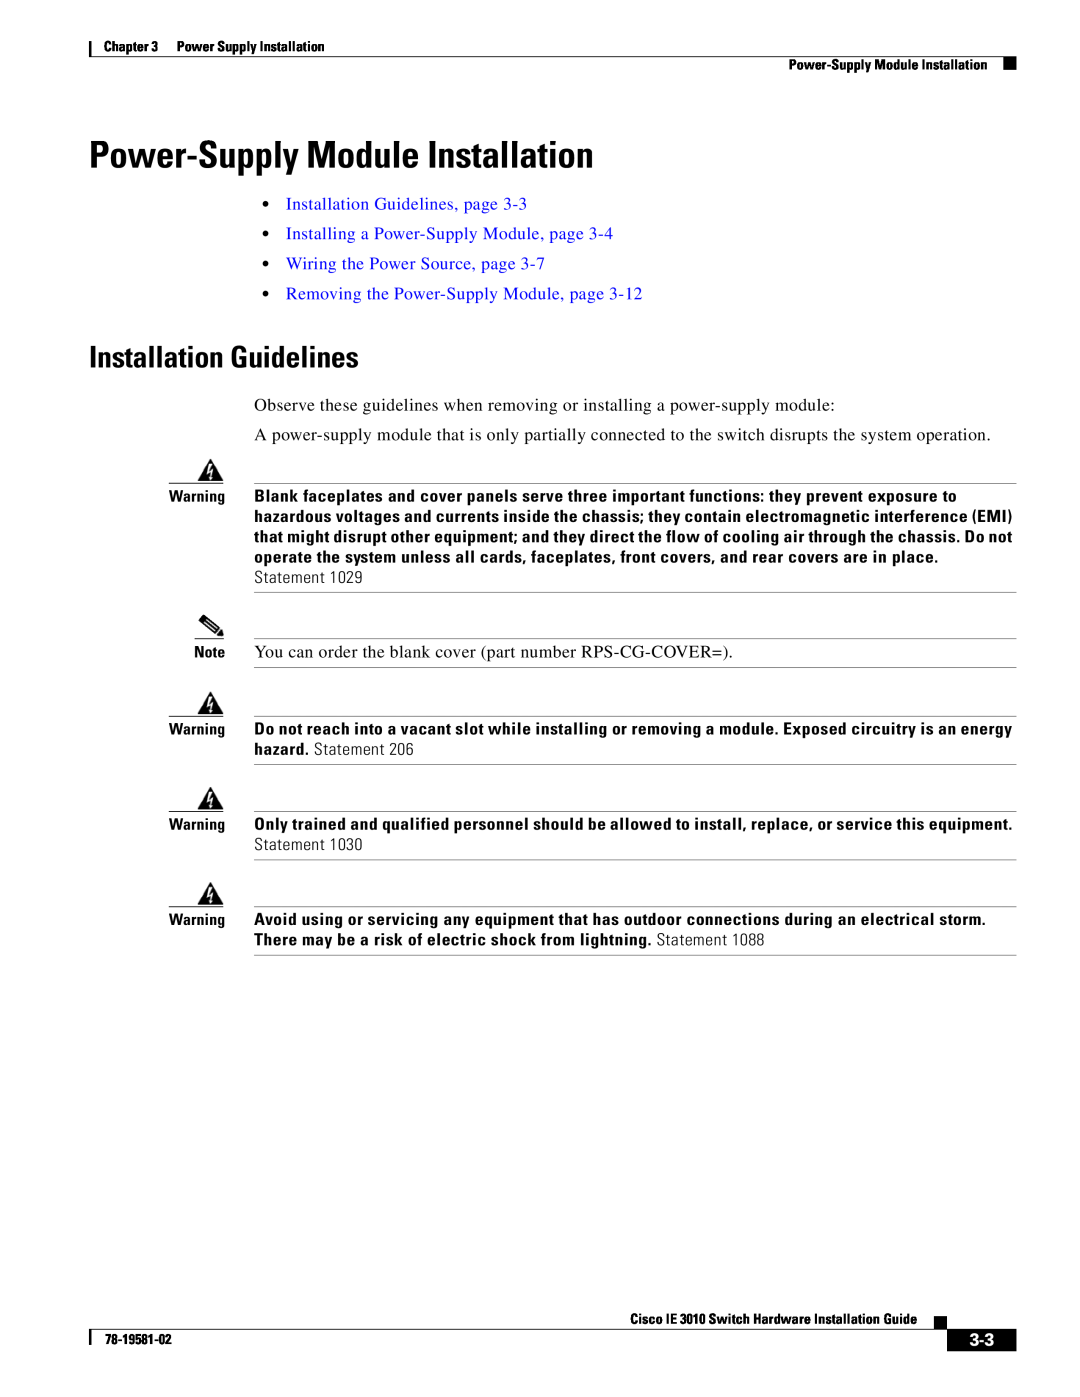 Cisco Systems IE301024TC manual Power-Supply Module Installation, Installation Guidelines 